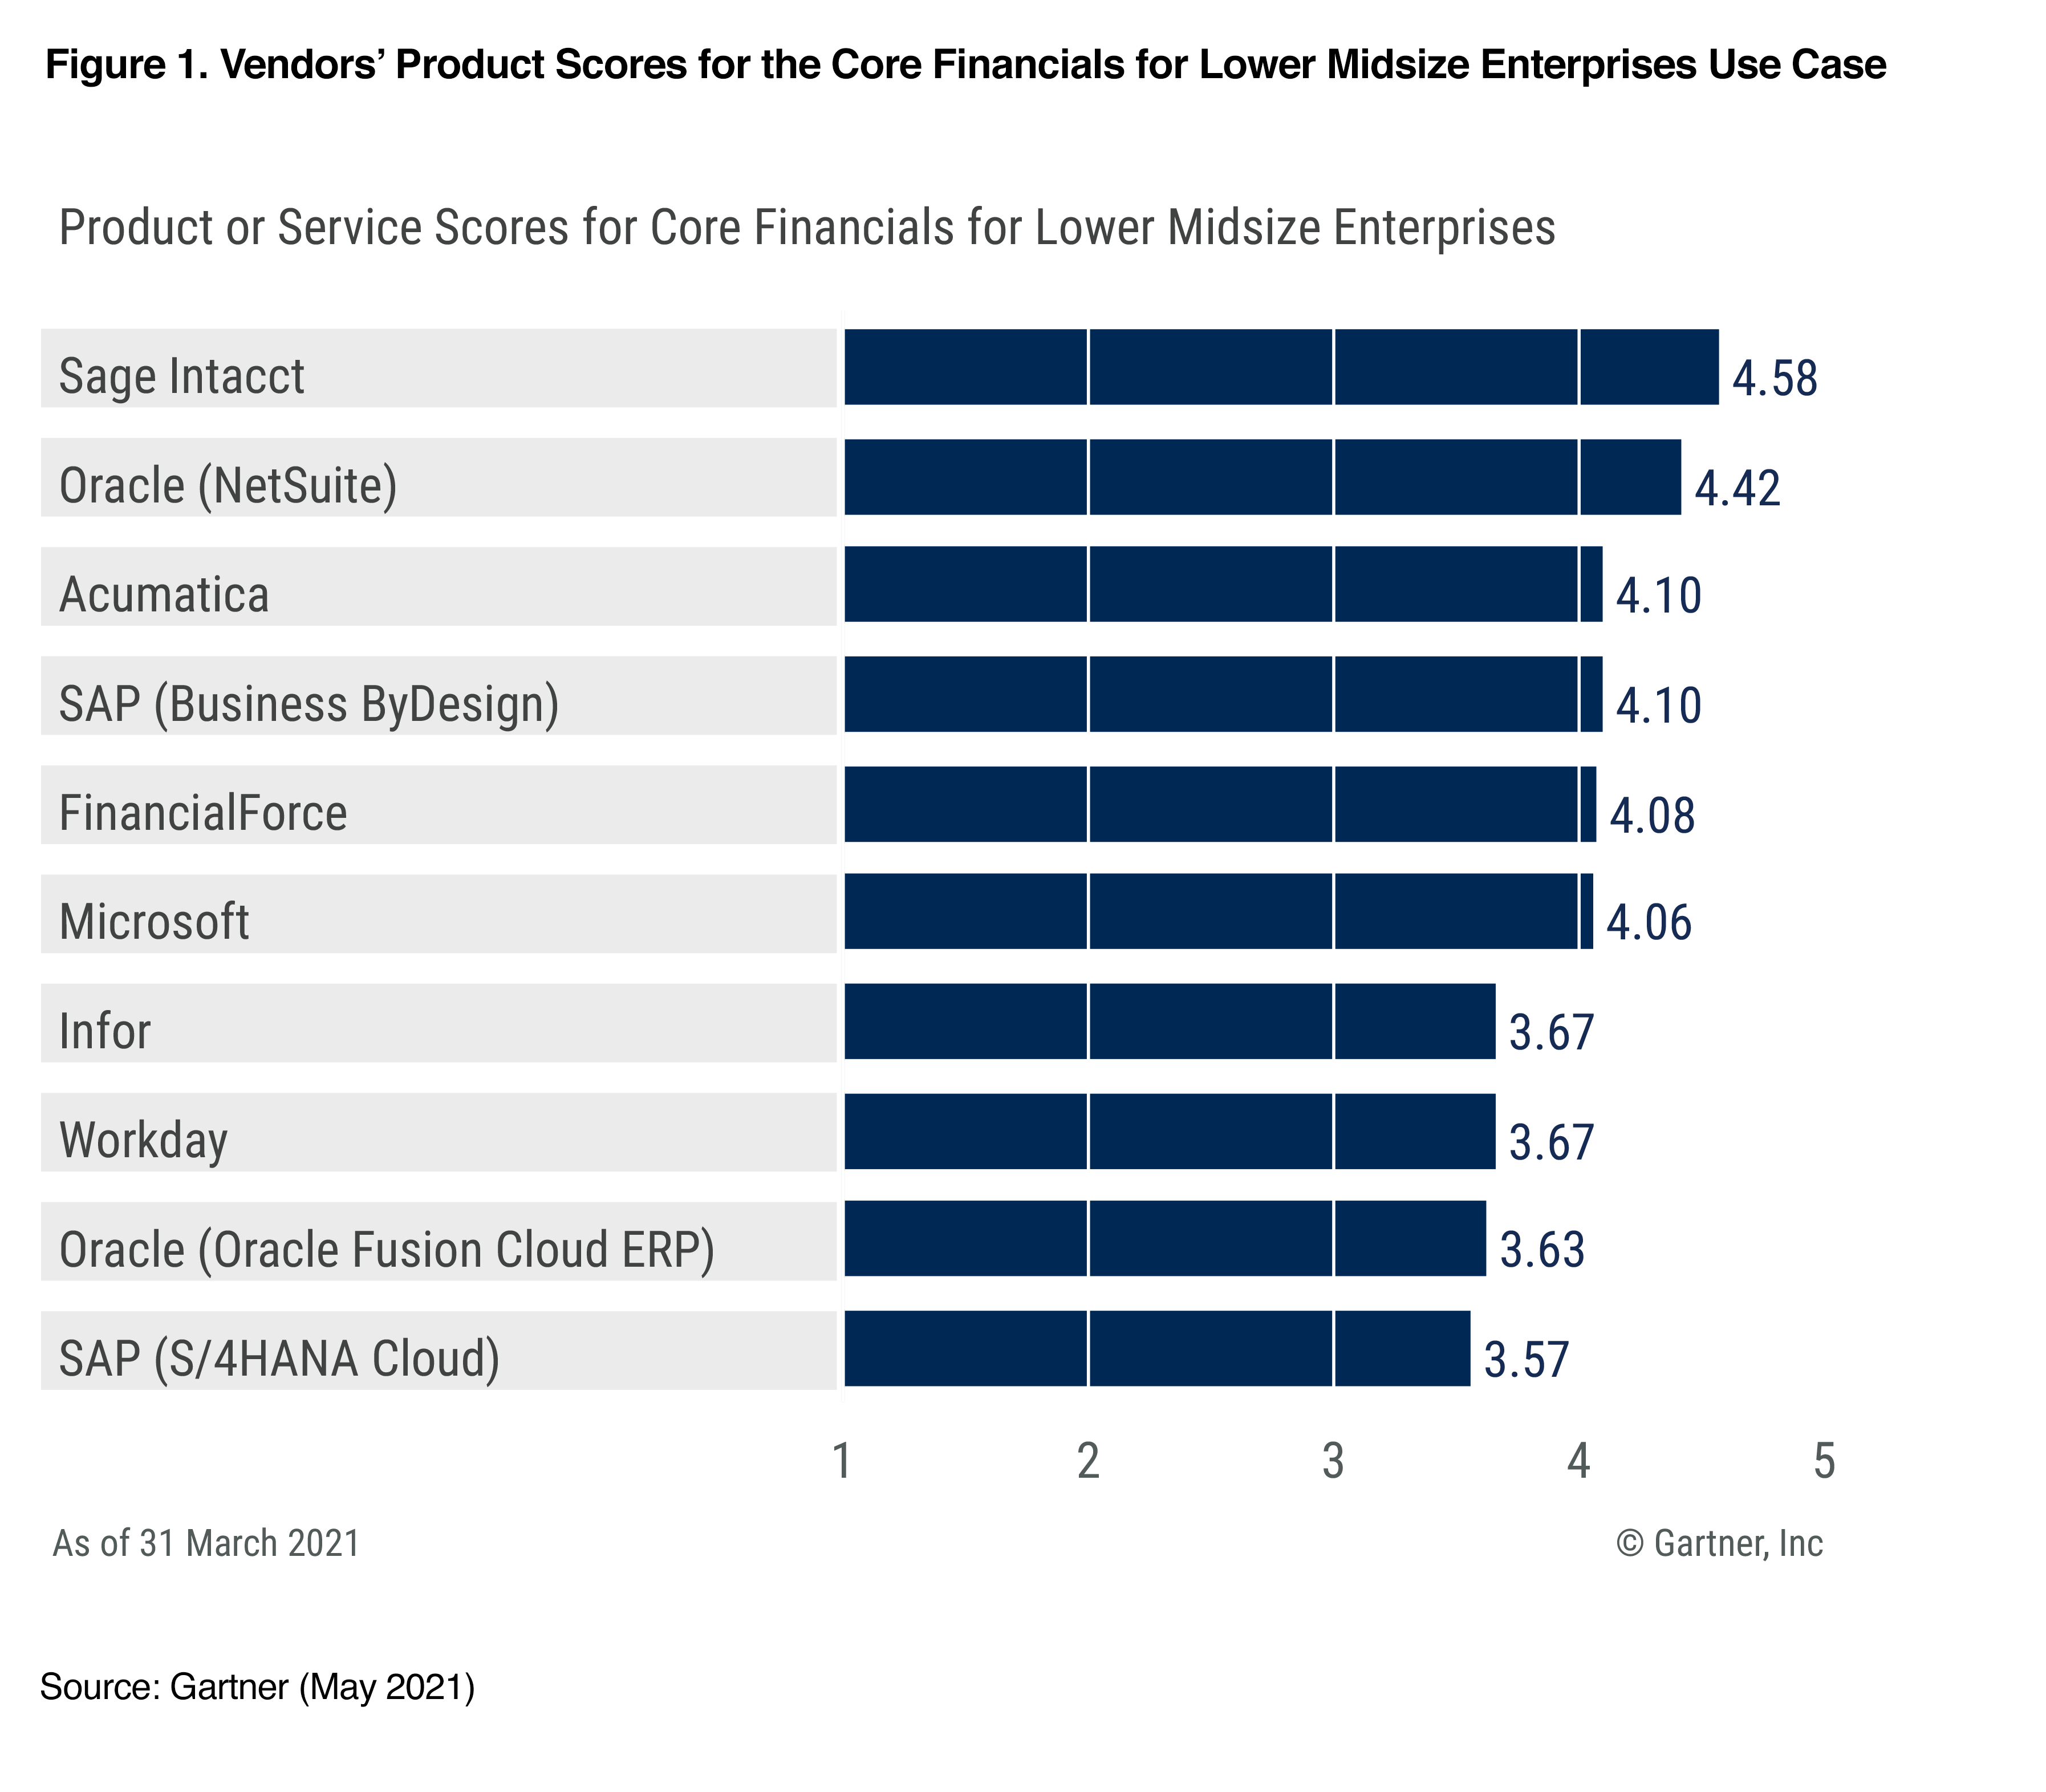 This Chart Shows Product or service scores for core Financials for Lower Midsize Enterprises